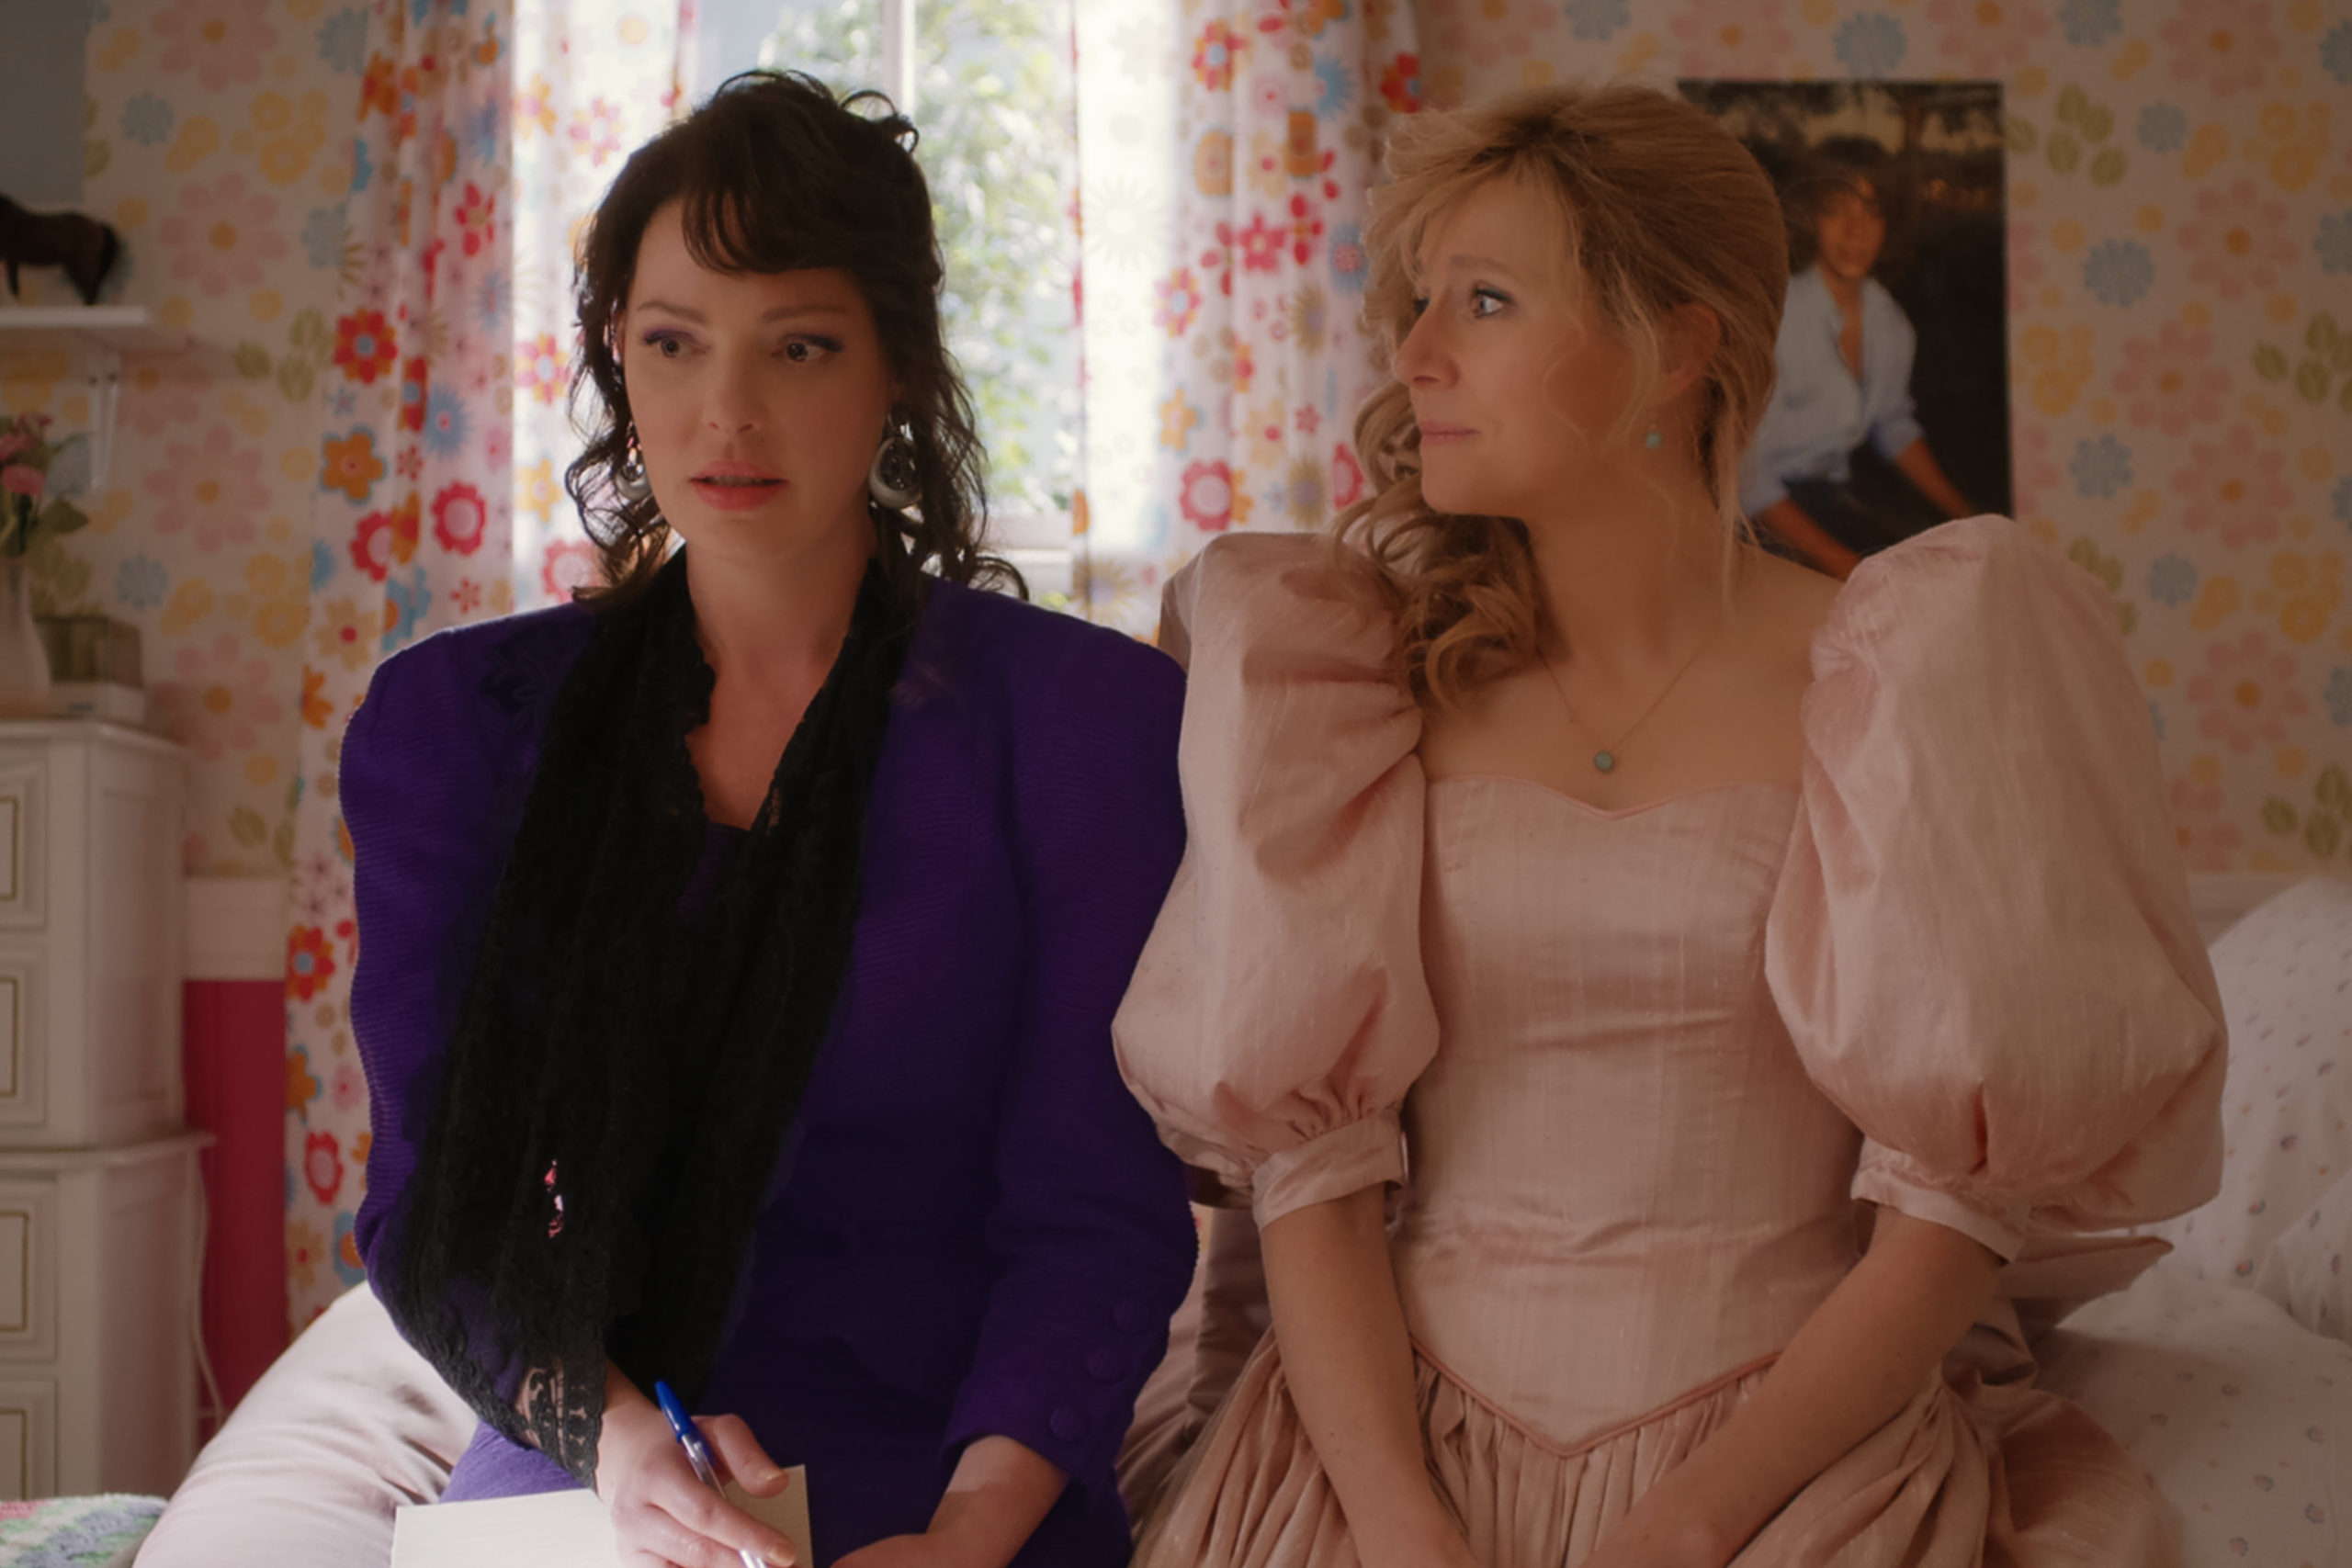 FIREFLY LANE (L to R) KATHERINE HEIGL as TULLY and SARAH CHALKE as KATE in episode 108 of FIREFLY LANE. Cr. COURTESY OF NETFLIX © 2020